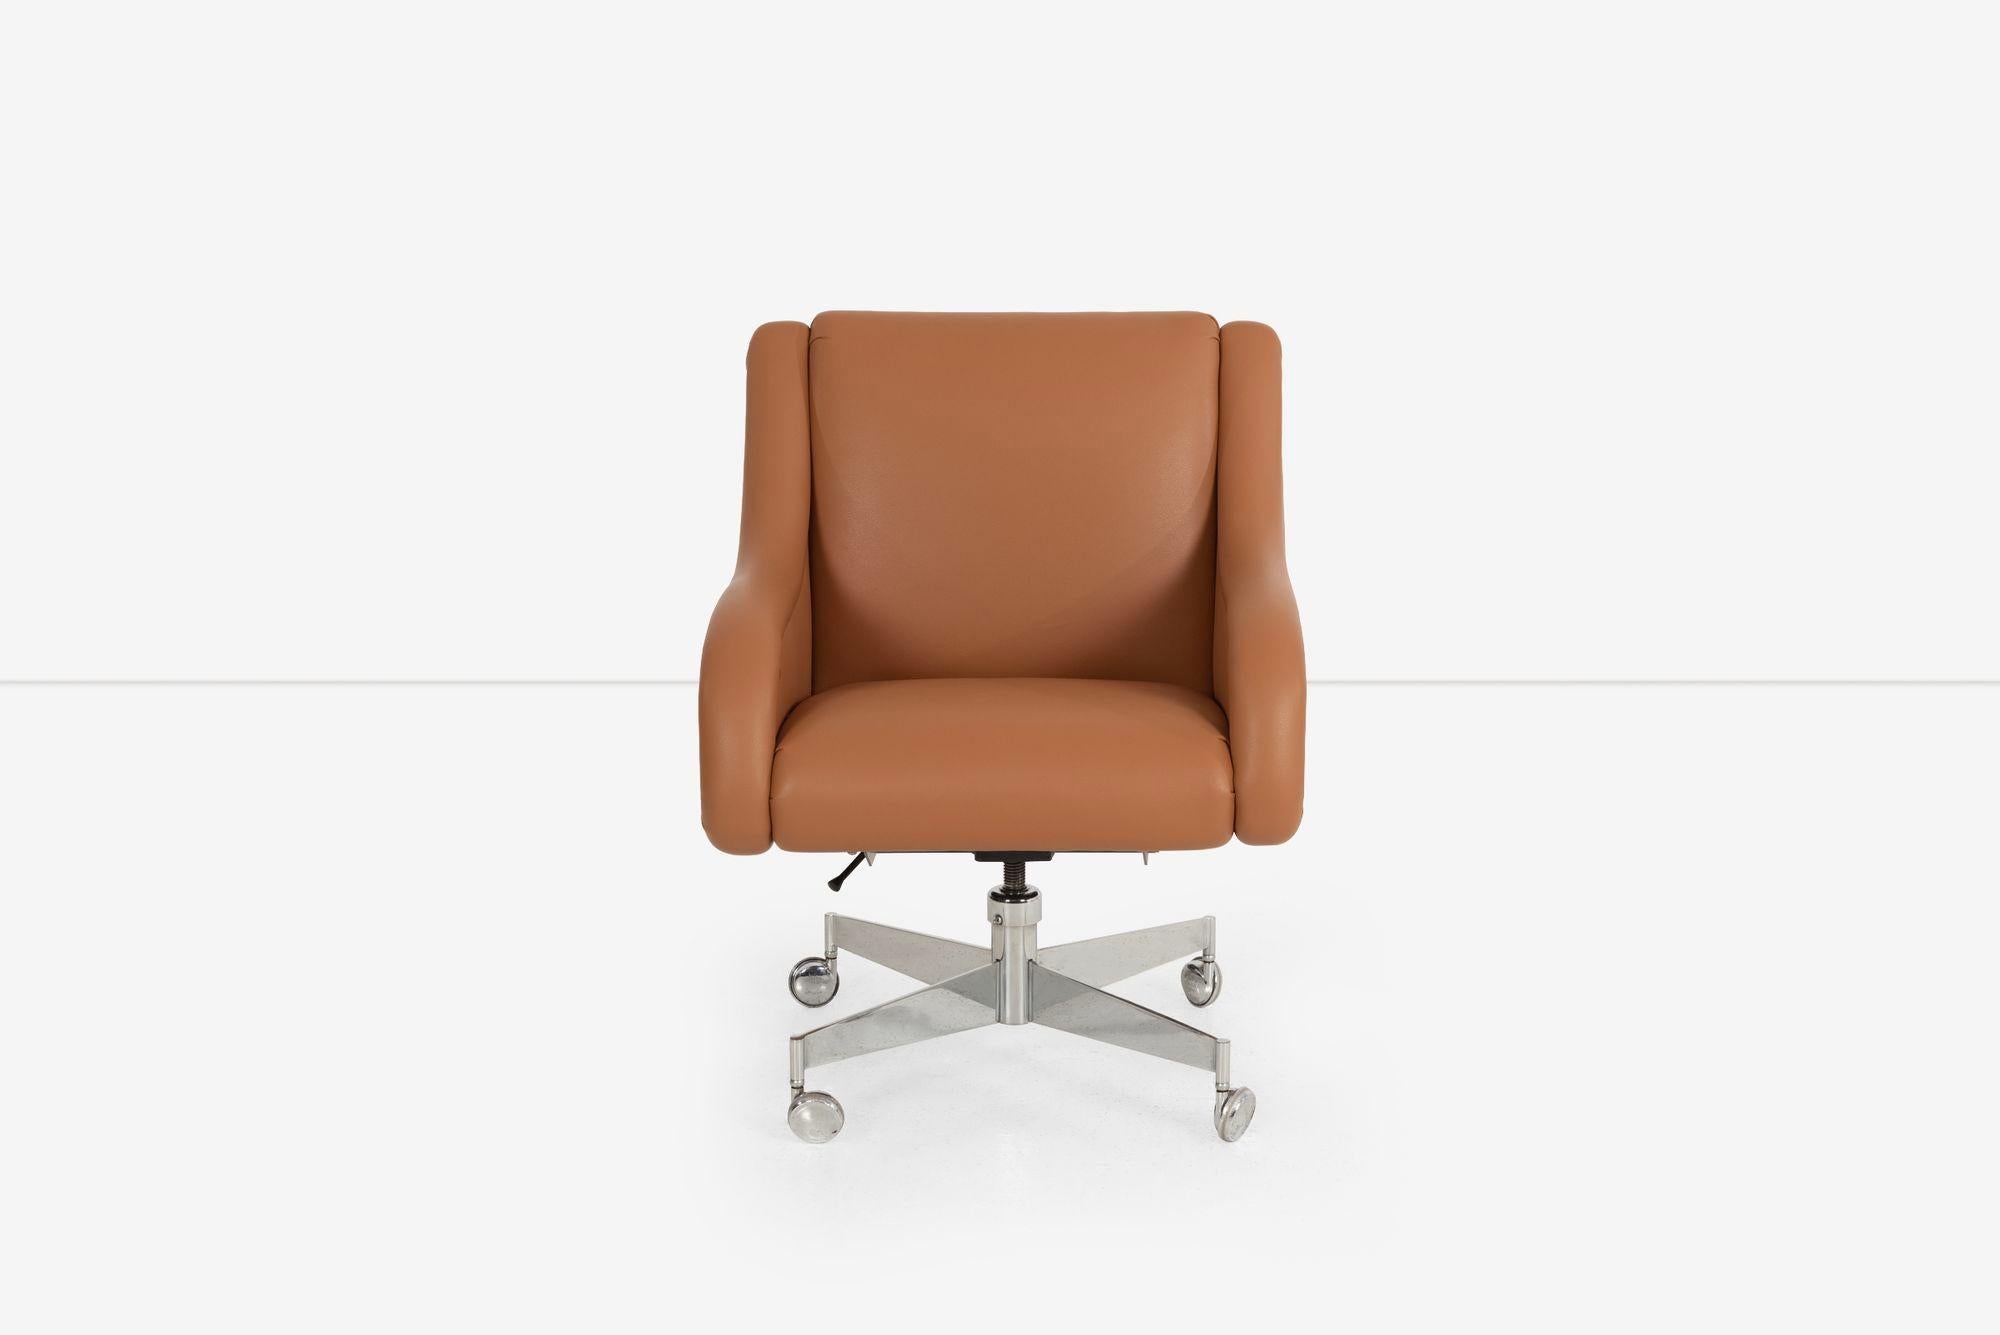 Roger Sprunger for Dunbar Desk Chair, reupholstered with Spinneybeck Leather.
High quality structure and mechanisms, tilt swivels and is adjustable, Label on underside Metal 